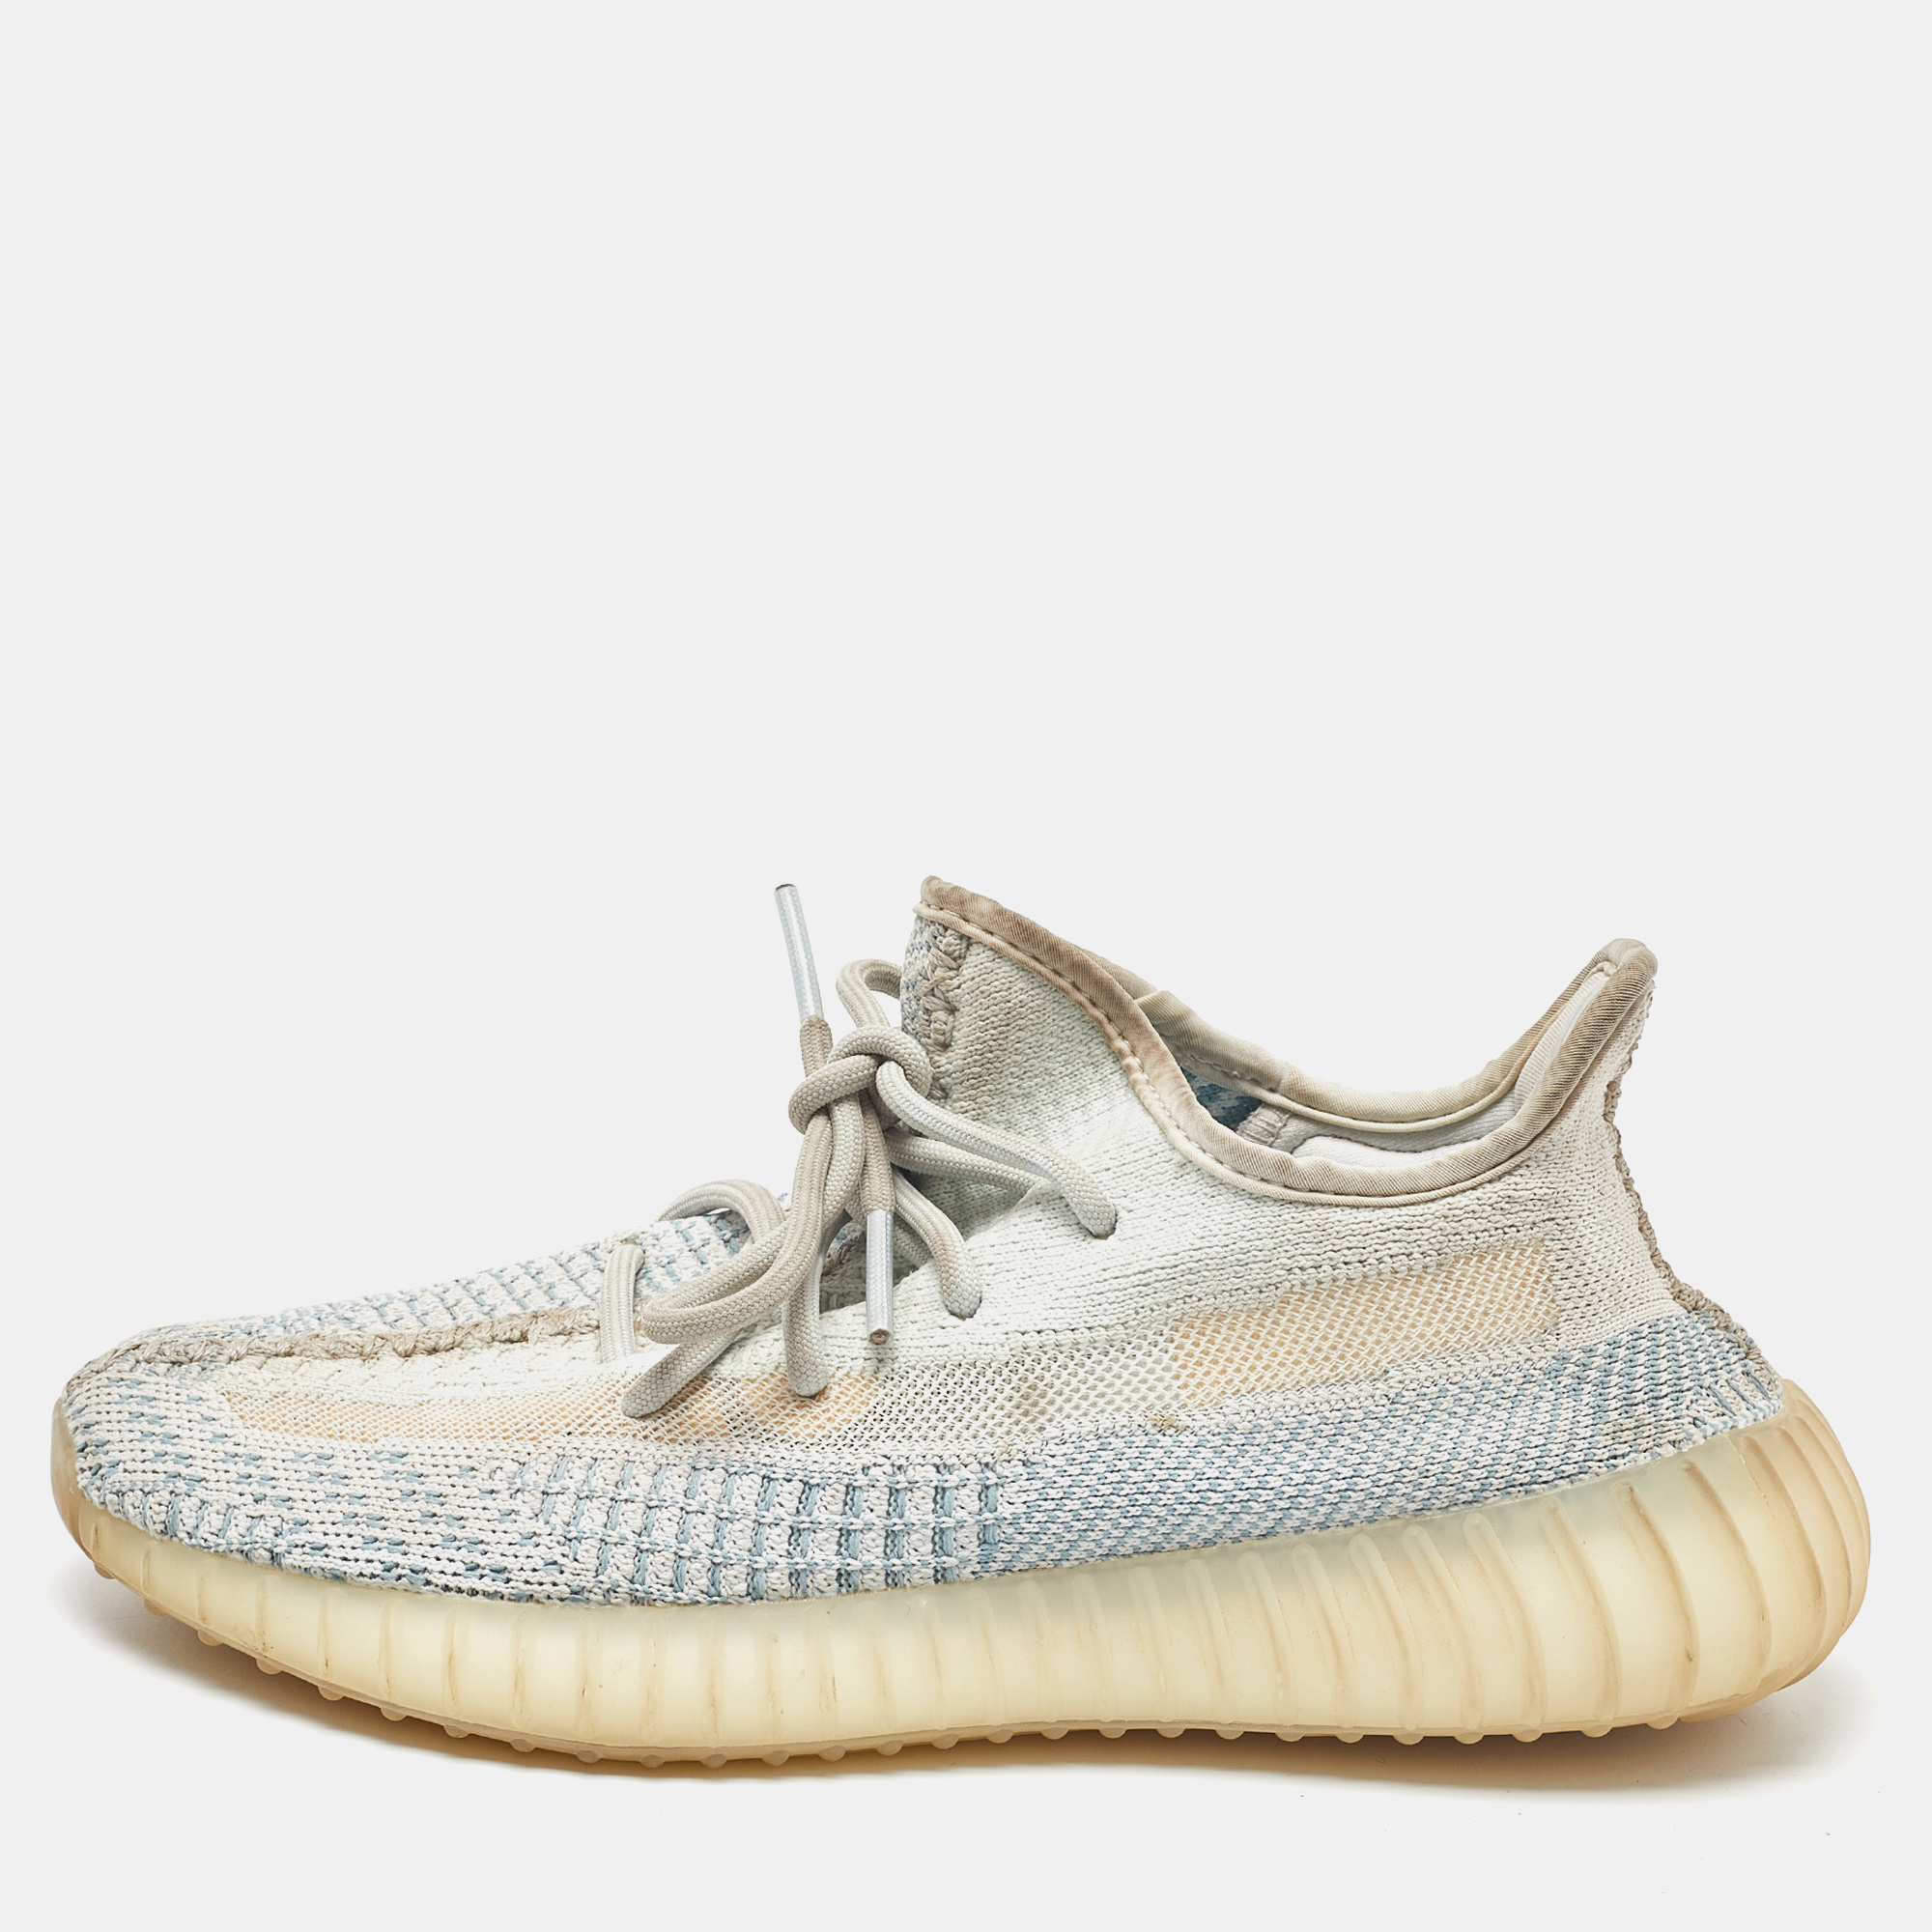 Pre-owned Yeezy X Adidas White/green Knit Fabric Boost 350 V2 Cloud White Non Reflective Sneakers Size 38 2/3